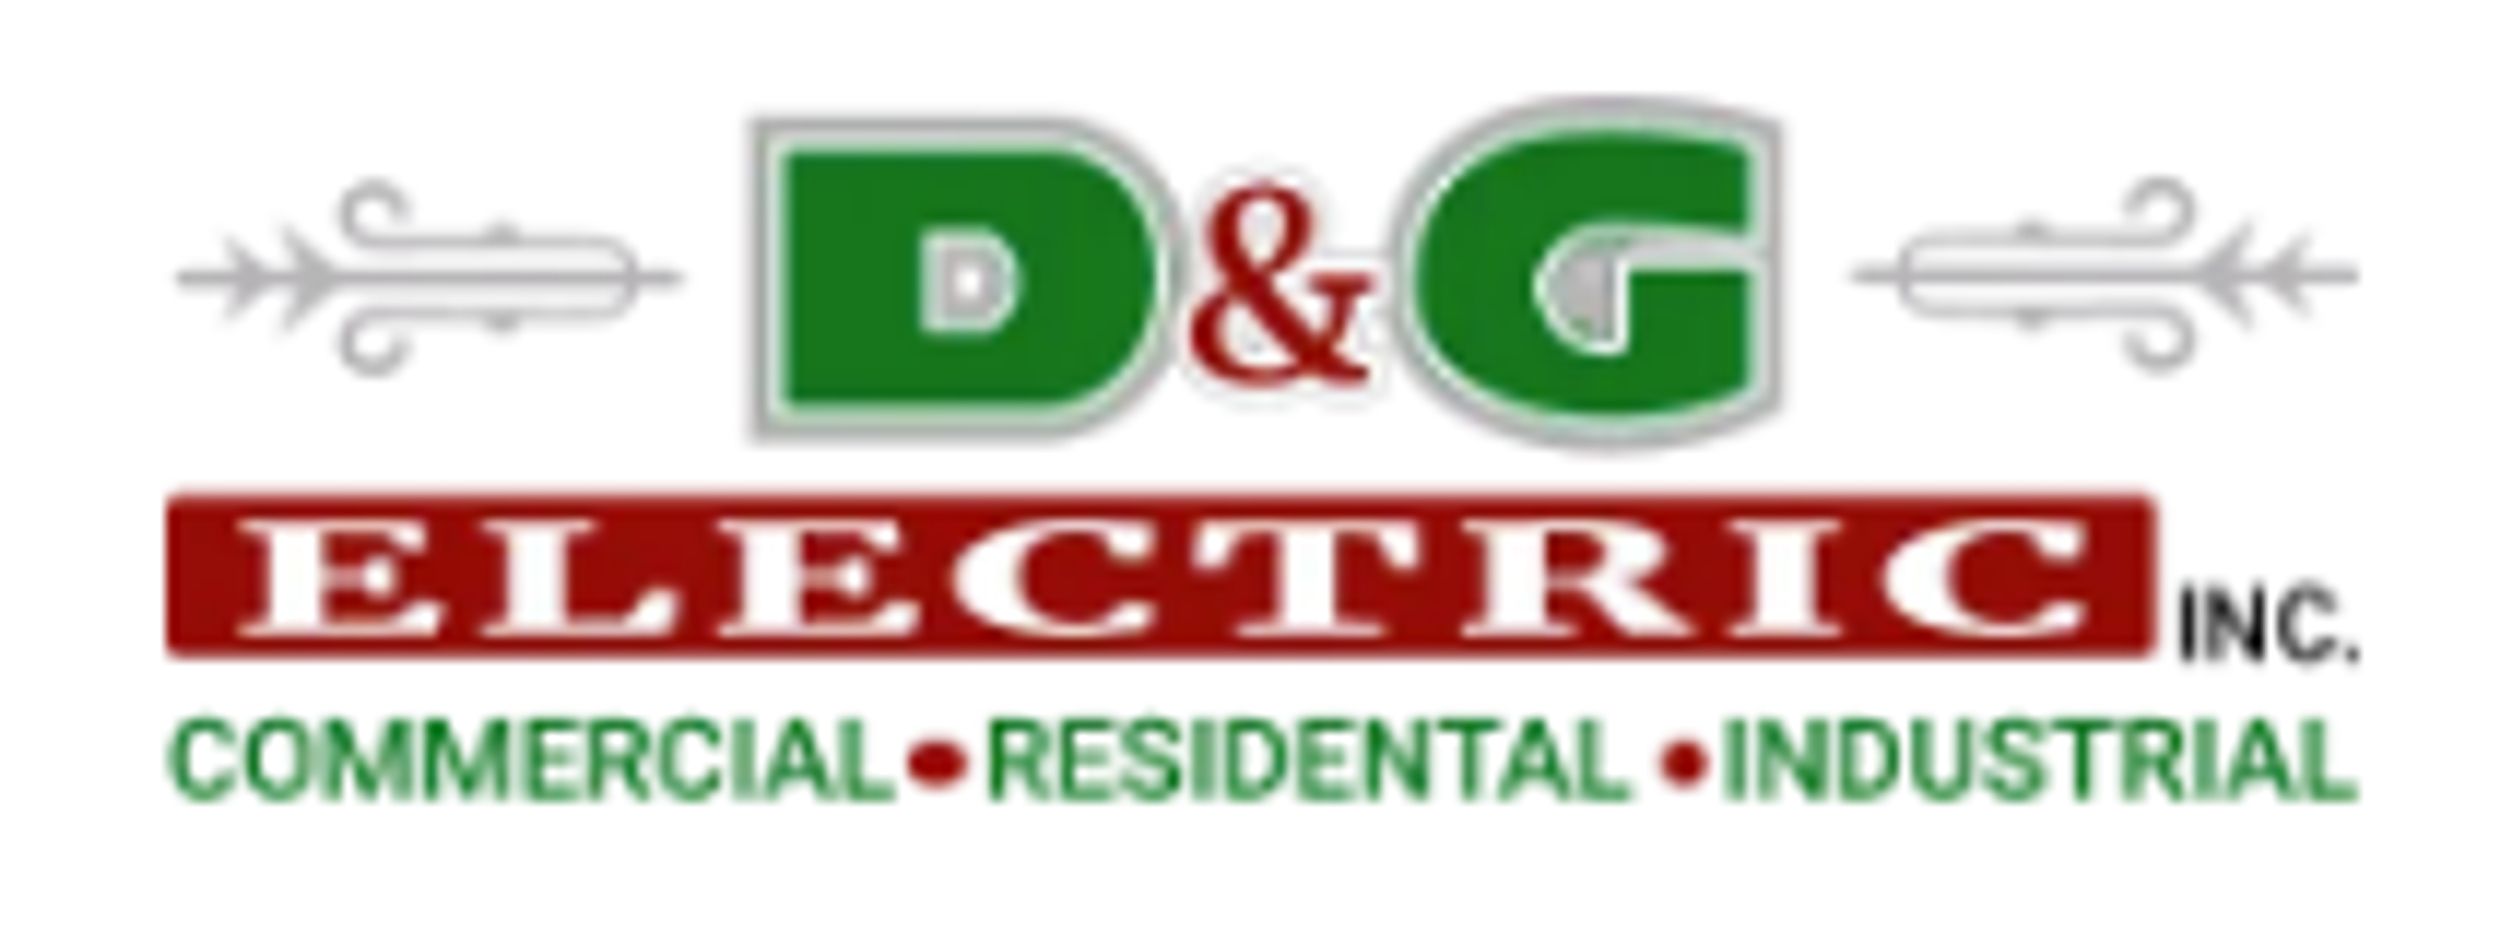 Business logo of D&G Electric Inc.